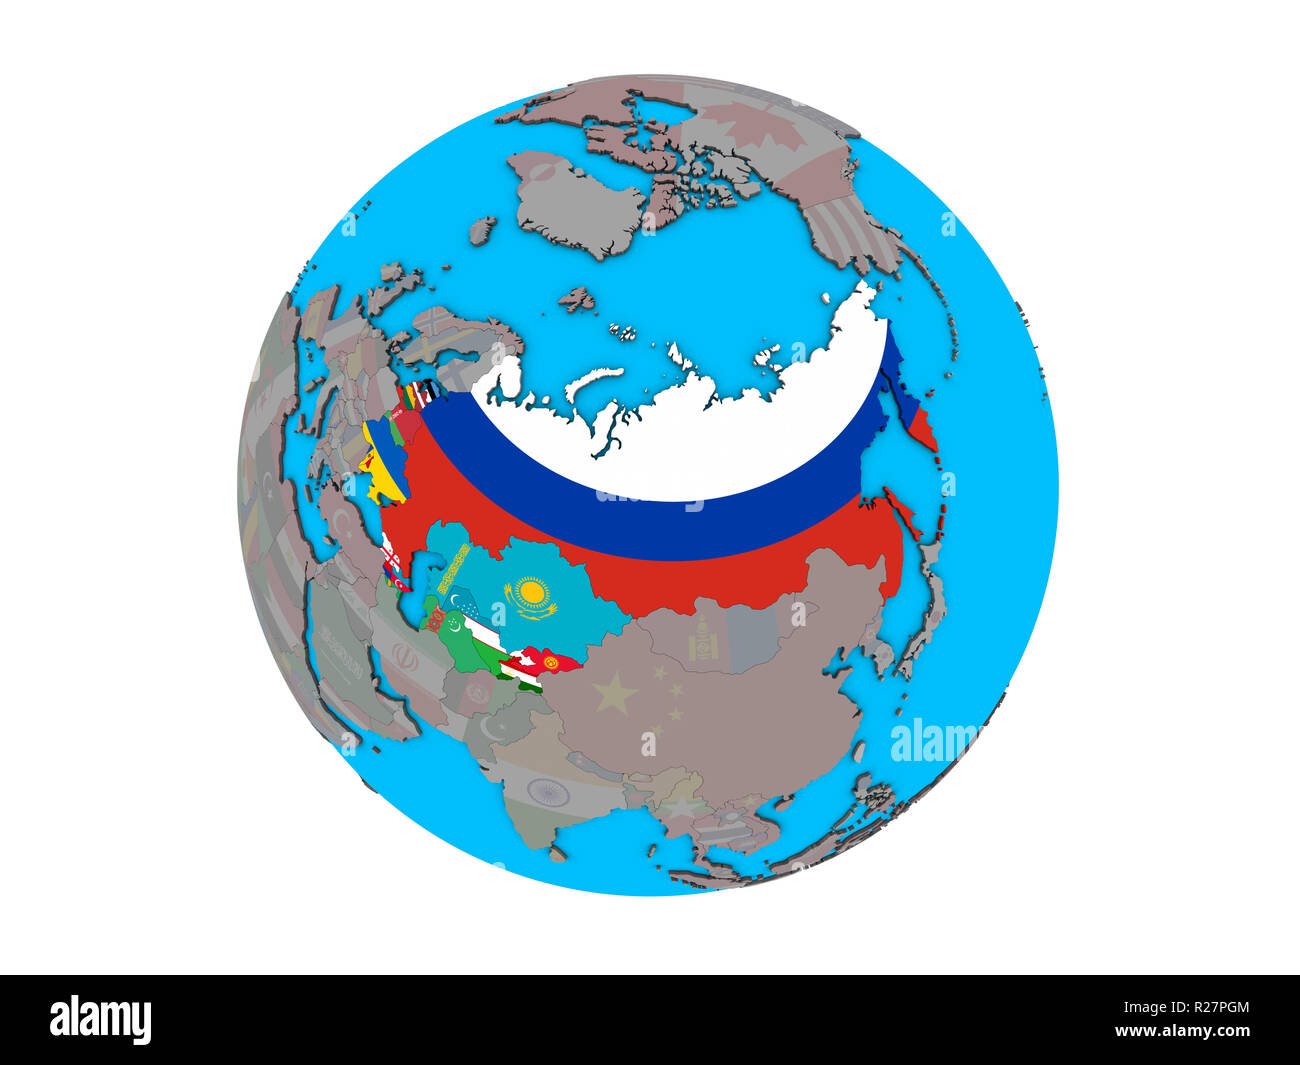 Former Soviet Union with embedded national flags on blue political 3D globe. 3D illustration isolated on white background. Stock Photo